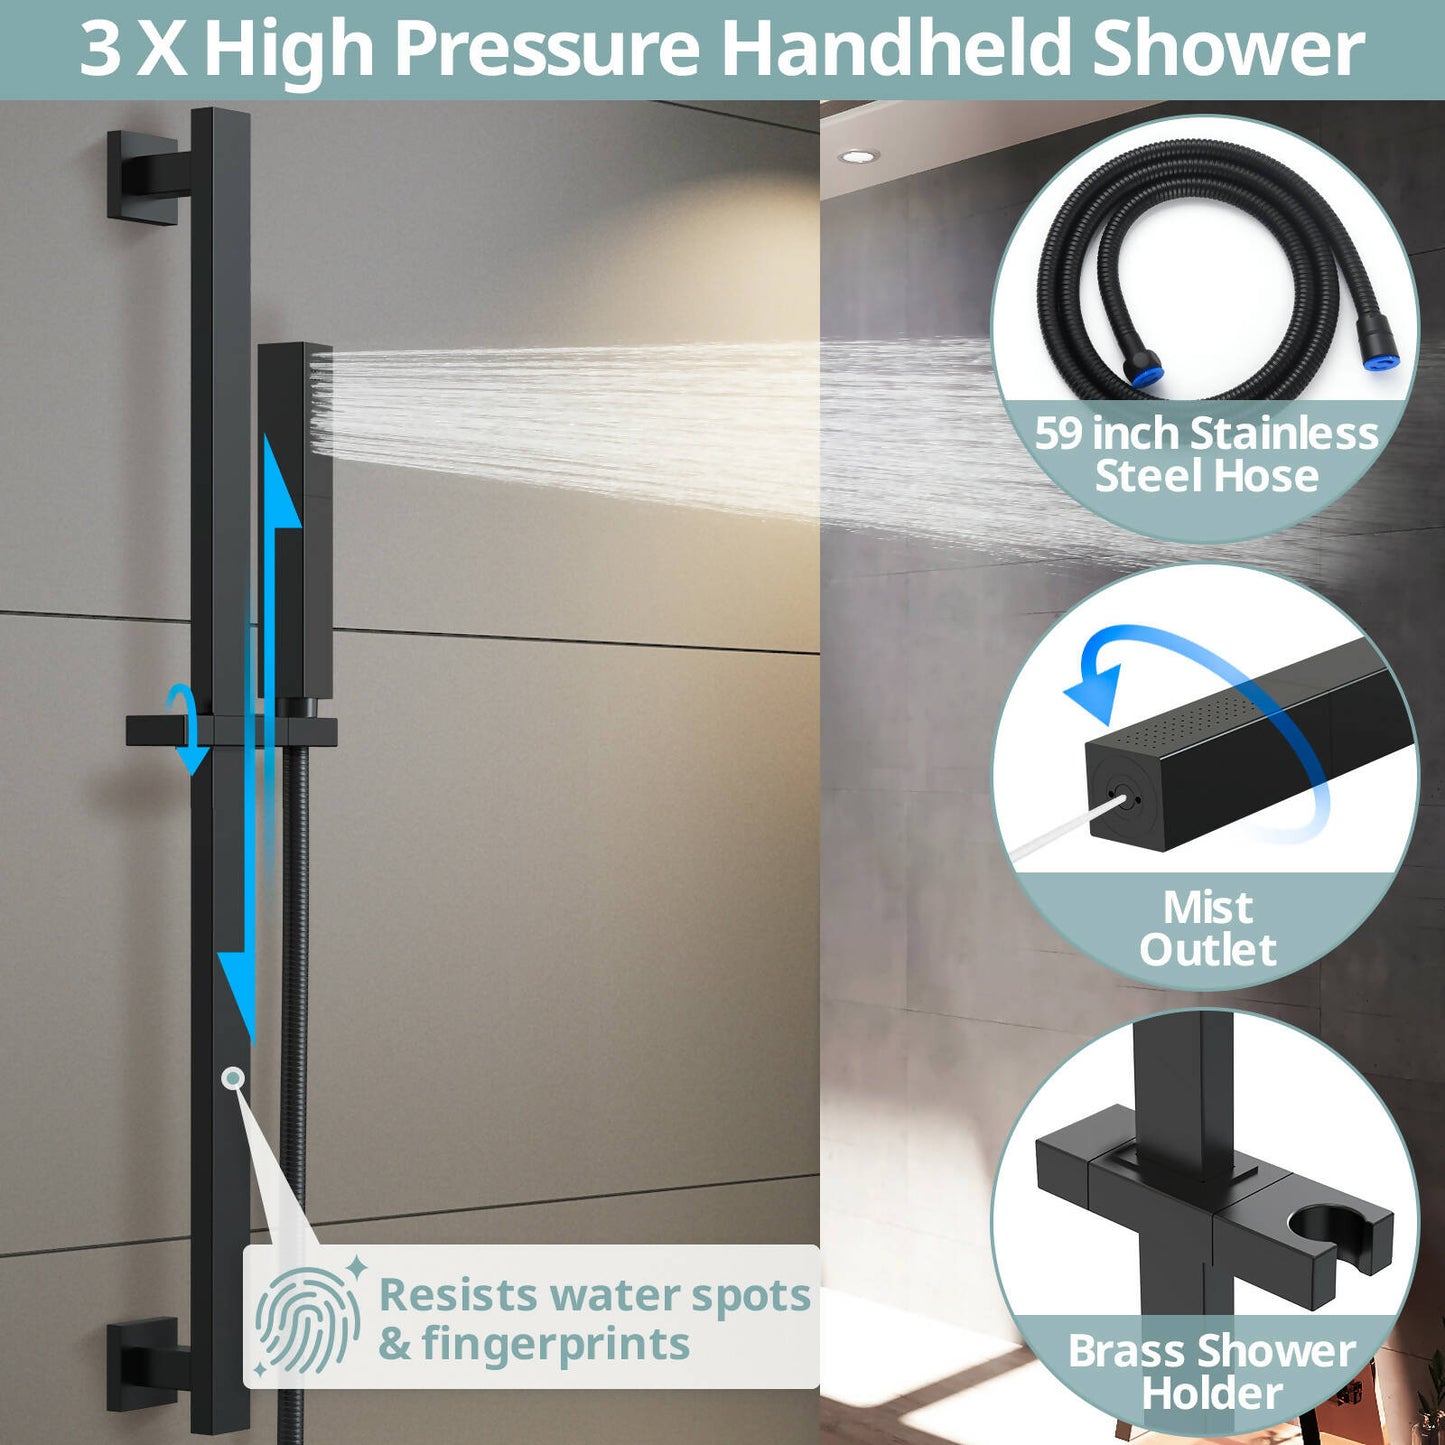 RelaxaJet 22" High-Pressure 3 Function Rainfall Shower Faucet, Wall Mount, Rough in-Valve, 2.5 GPM